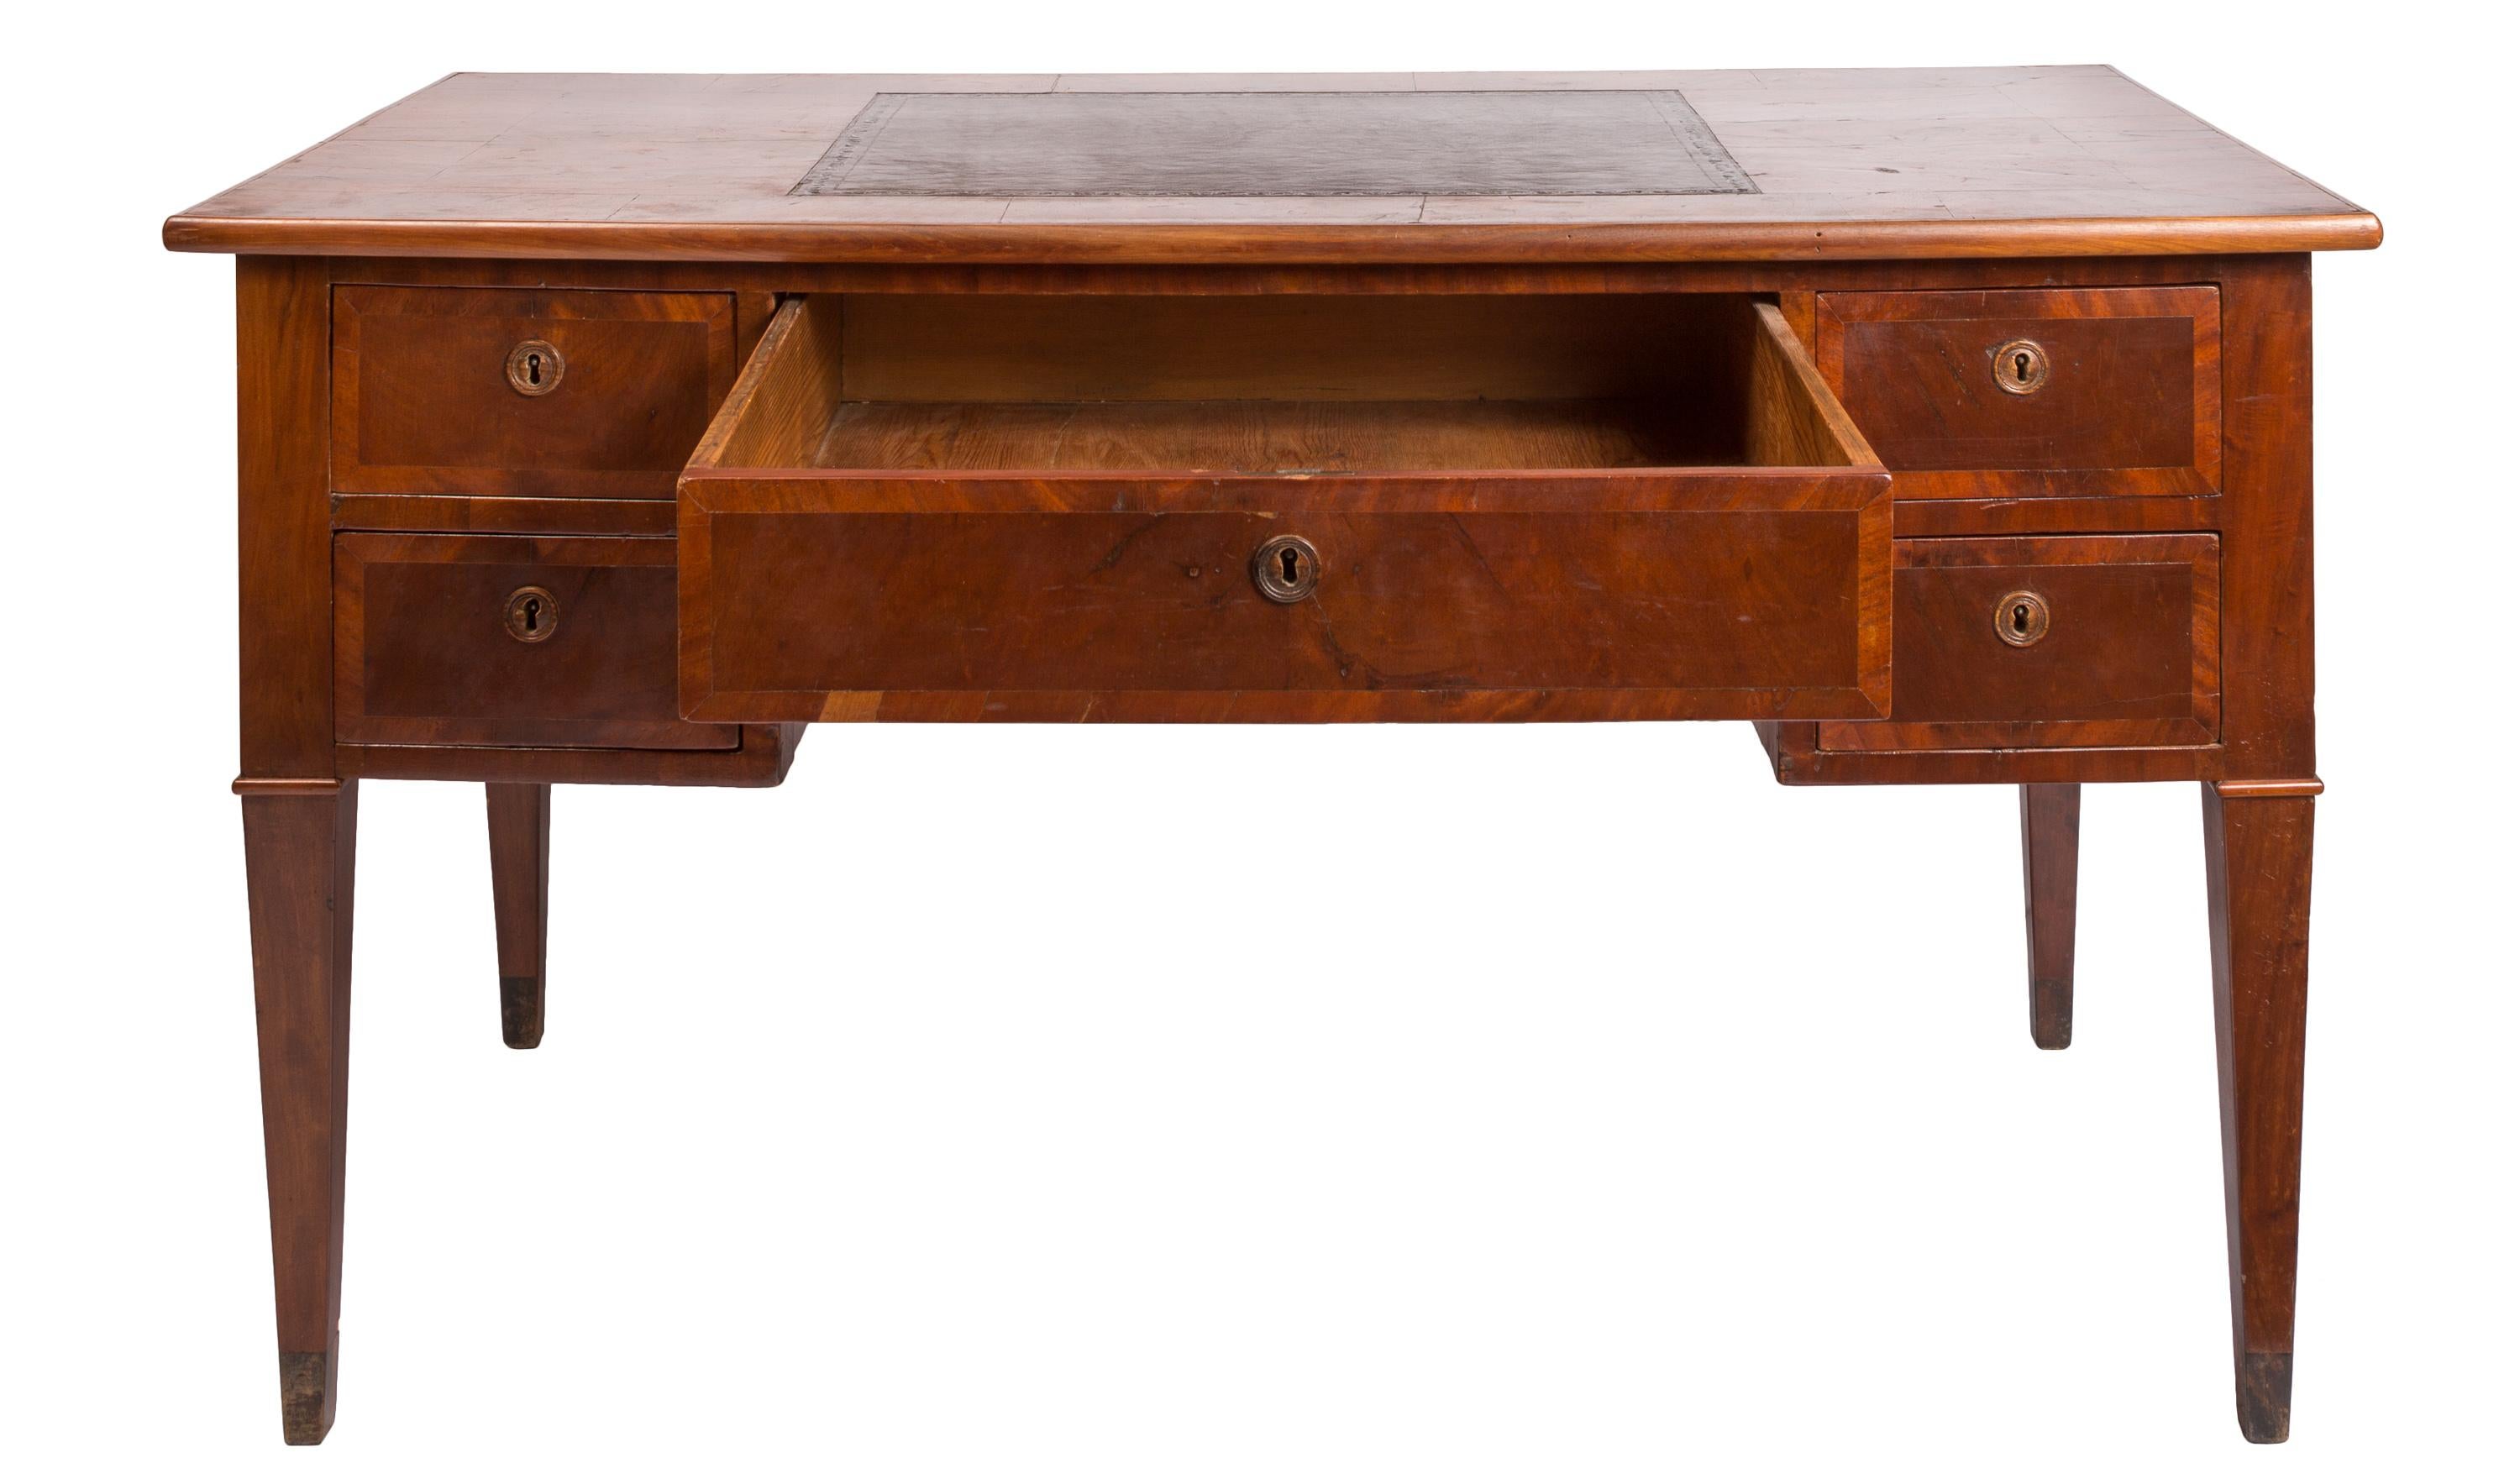 This mid-19th century English writing desk features handsomely inlaid rich-grained mahogany veneer. It is 